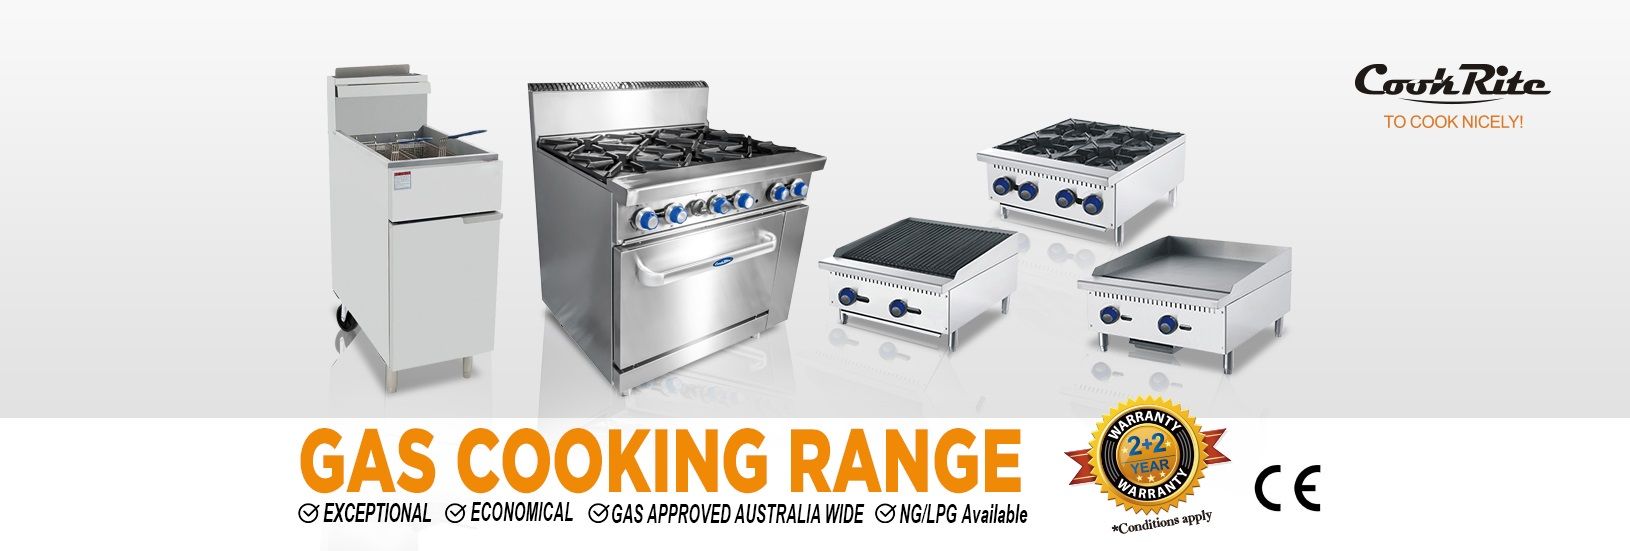 Simco Catering Equipment | restaurant | 3-9B Forge Street, Blacktown, NSW 2148, Australia | 1300883888 OR +61 1300 883 888